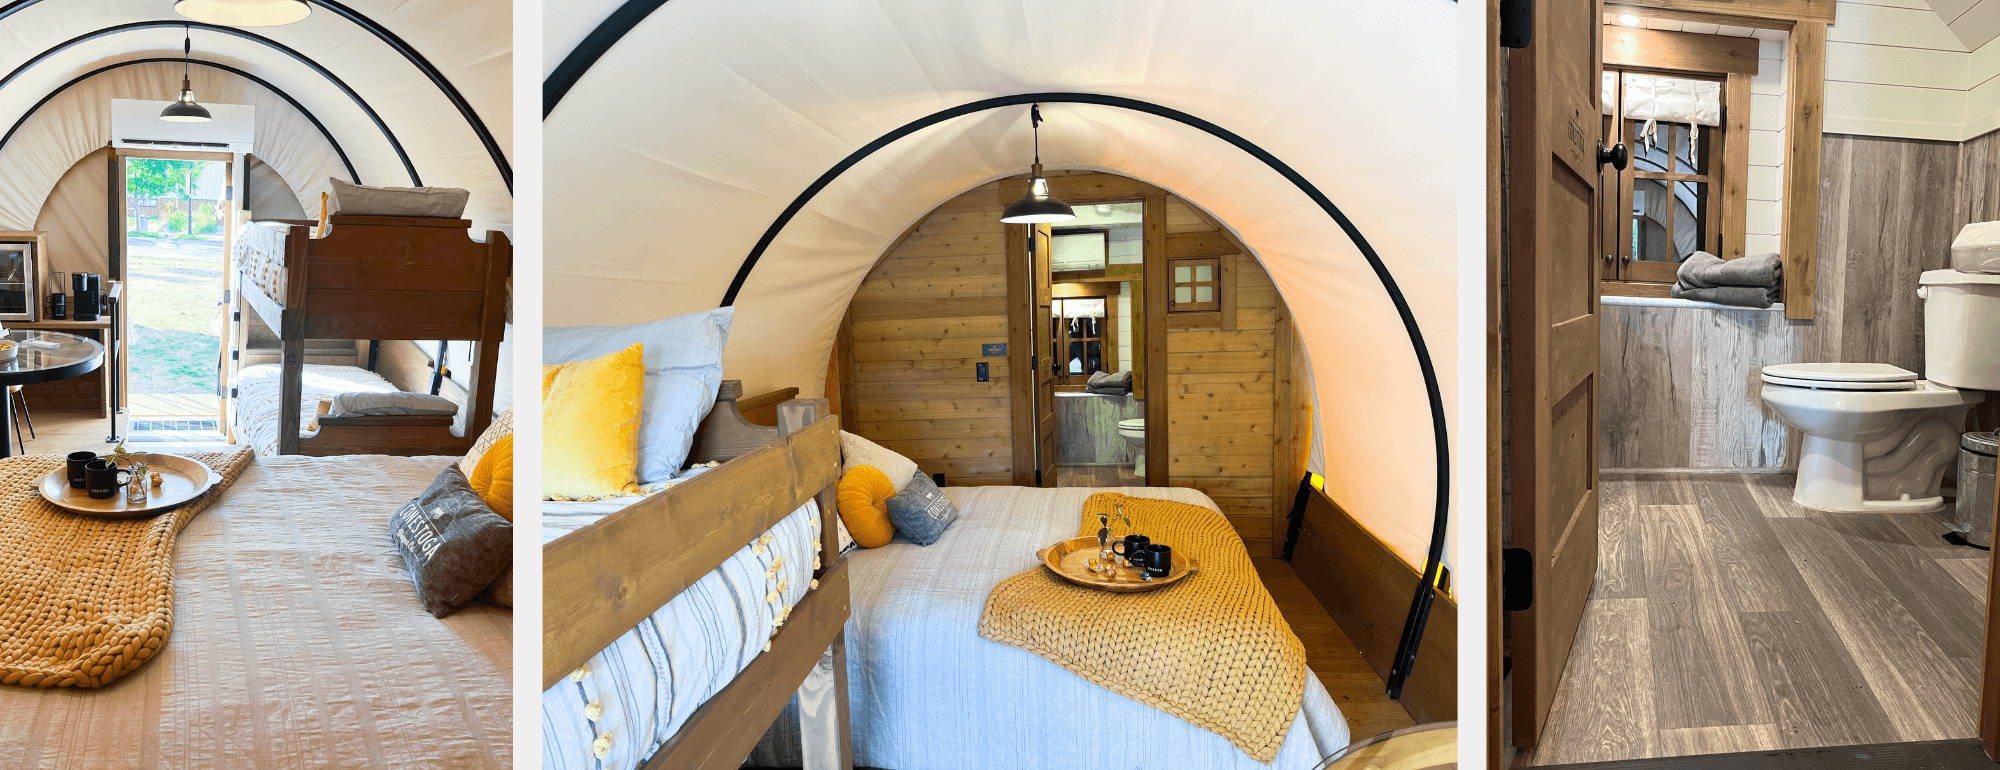 Inside photos of luxury camping wagon